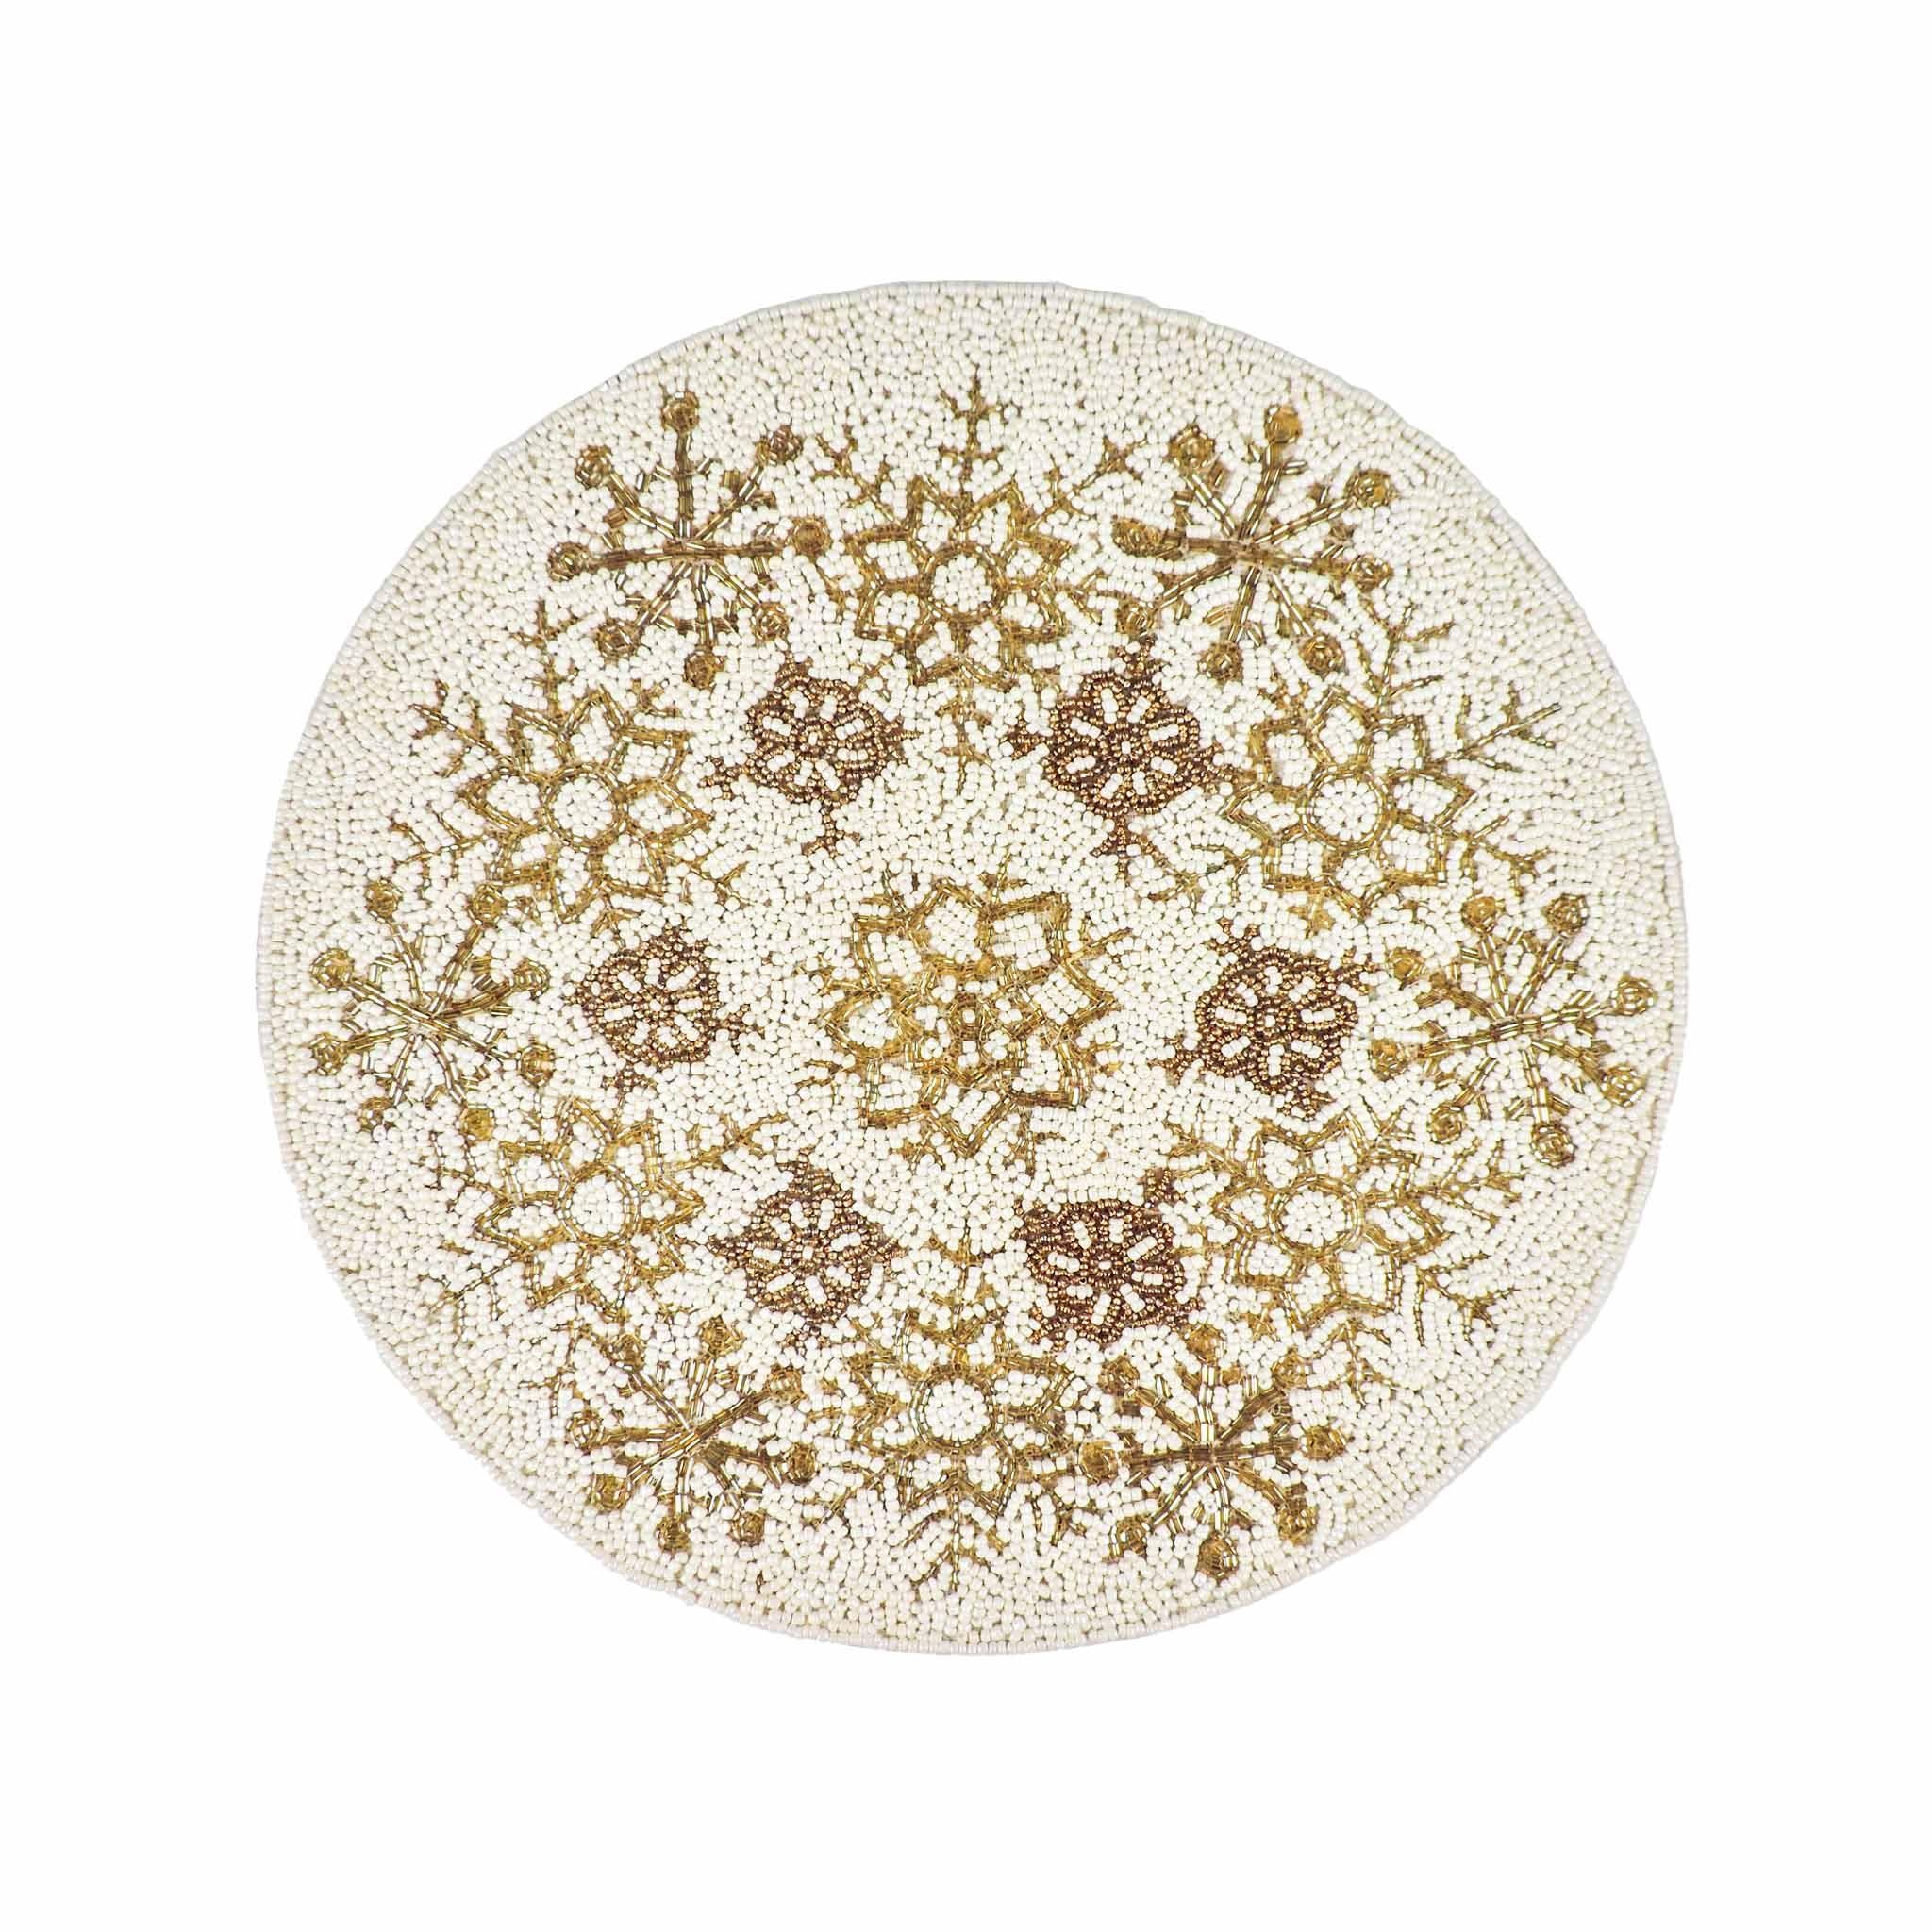 Chill-Out Bead Embroidered Placemat<br>Color: Cream & Gold<br>Size: 13.5" Round<br>Set of 2 - Trunkin' USA